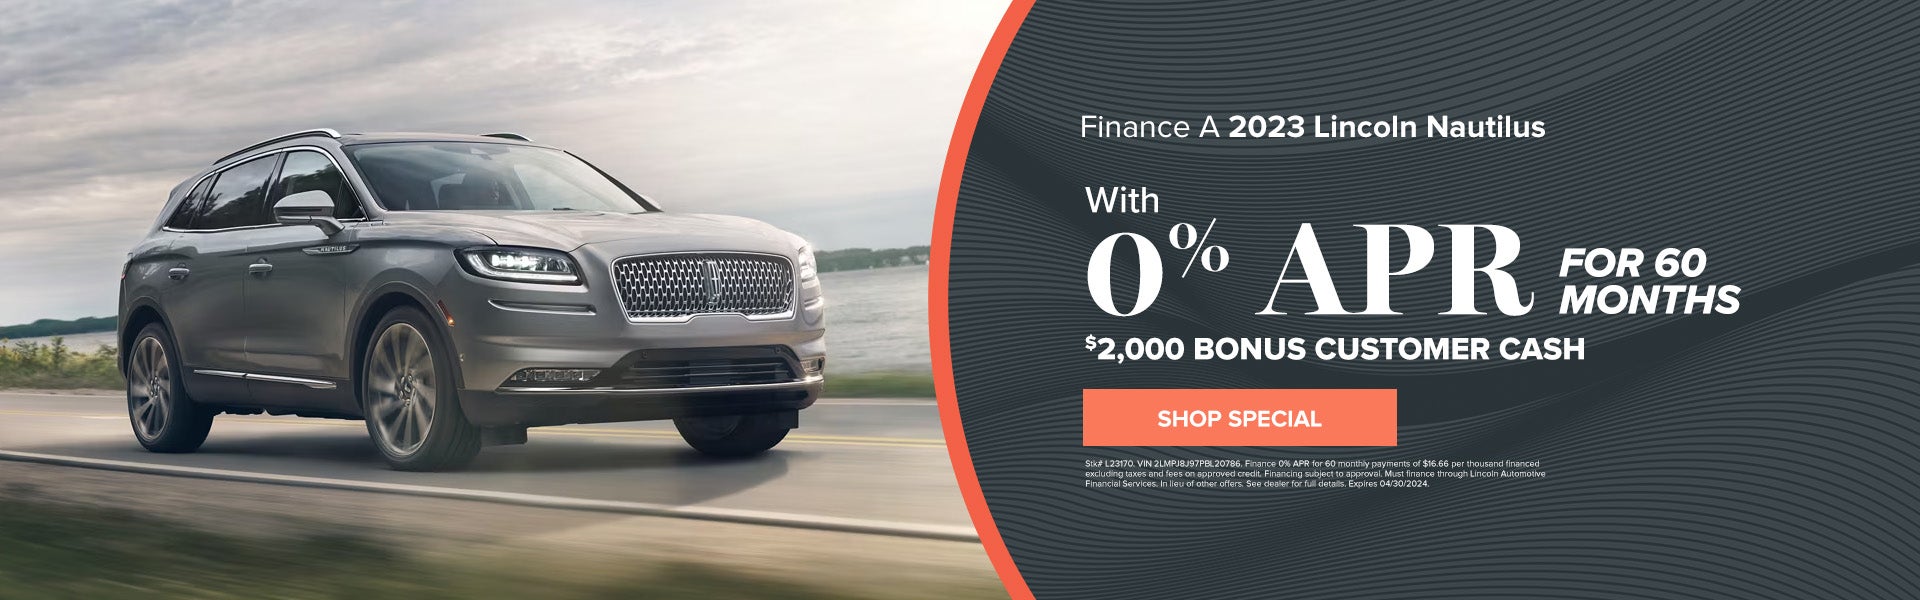 Finance A New 2023 Lincoln Nautilus As Low As 0% APR For 